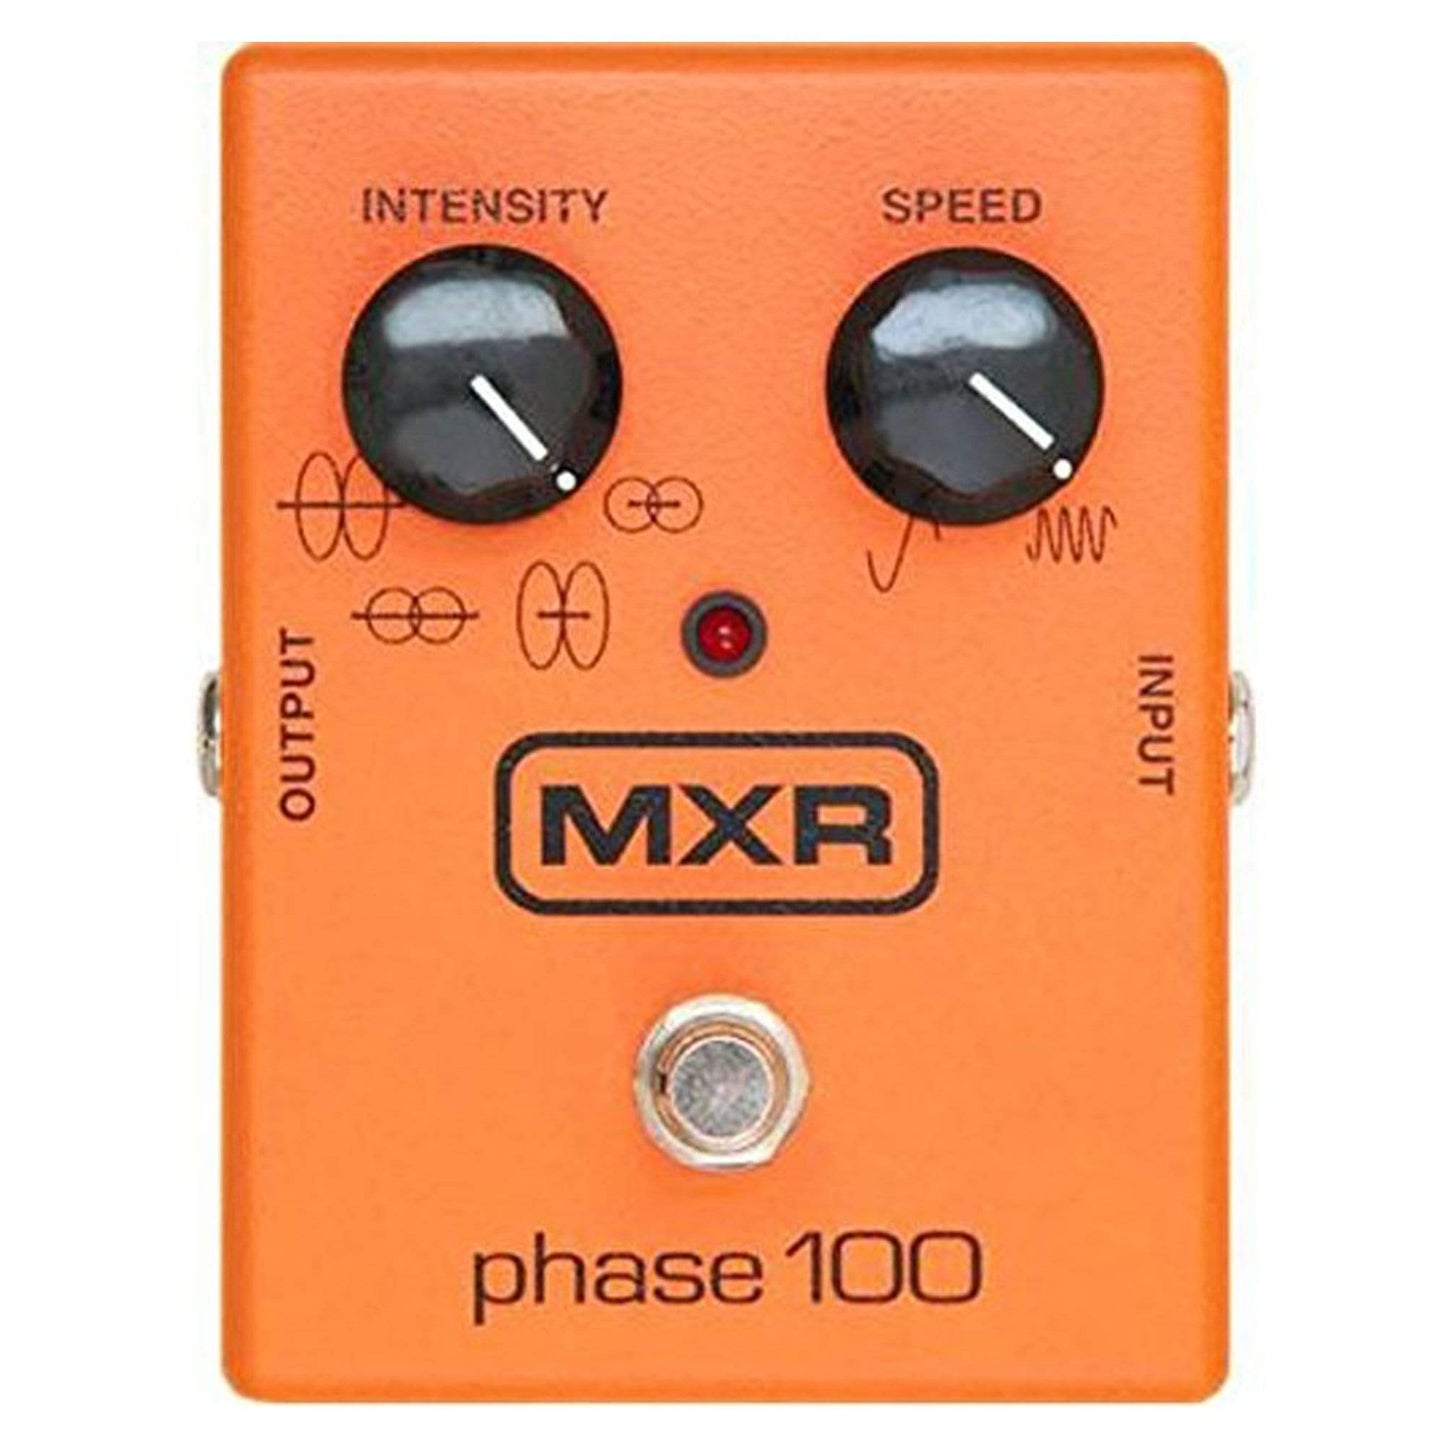 MXR M-107 Phase 100 Bundle W/MXR 10ft Instrument Cable Effects and Pedals / Phase Shifters